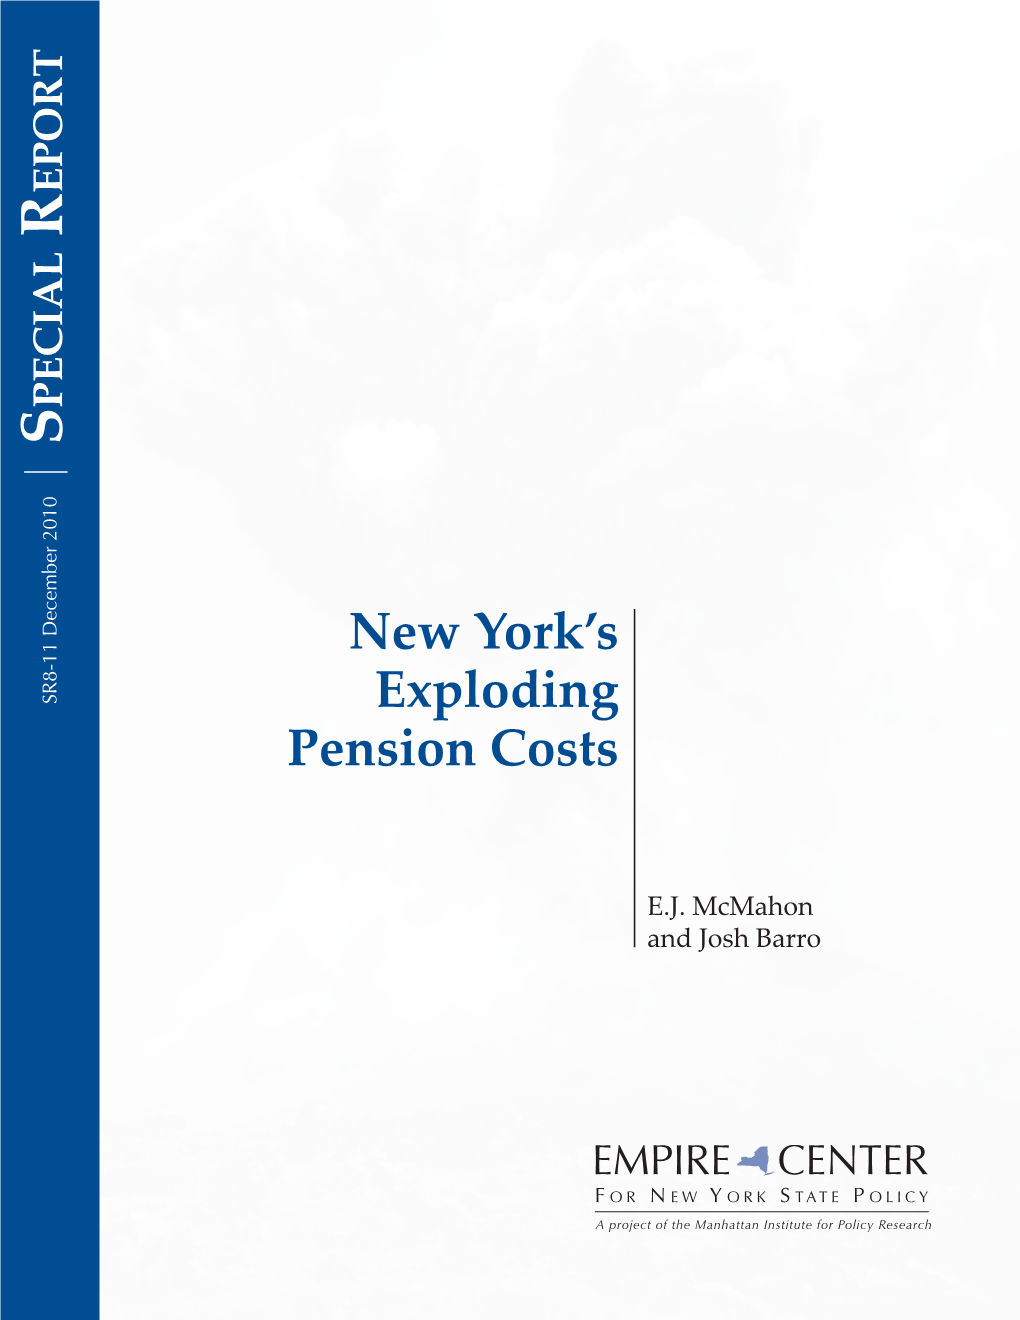 New York's Exploding Pension Costs